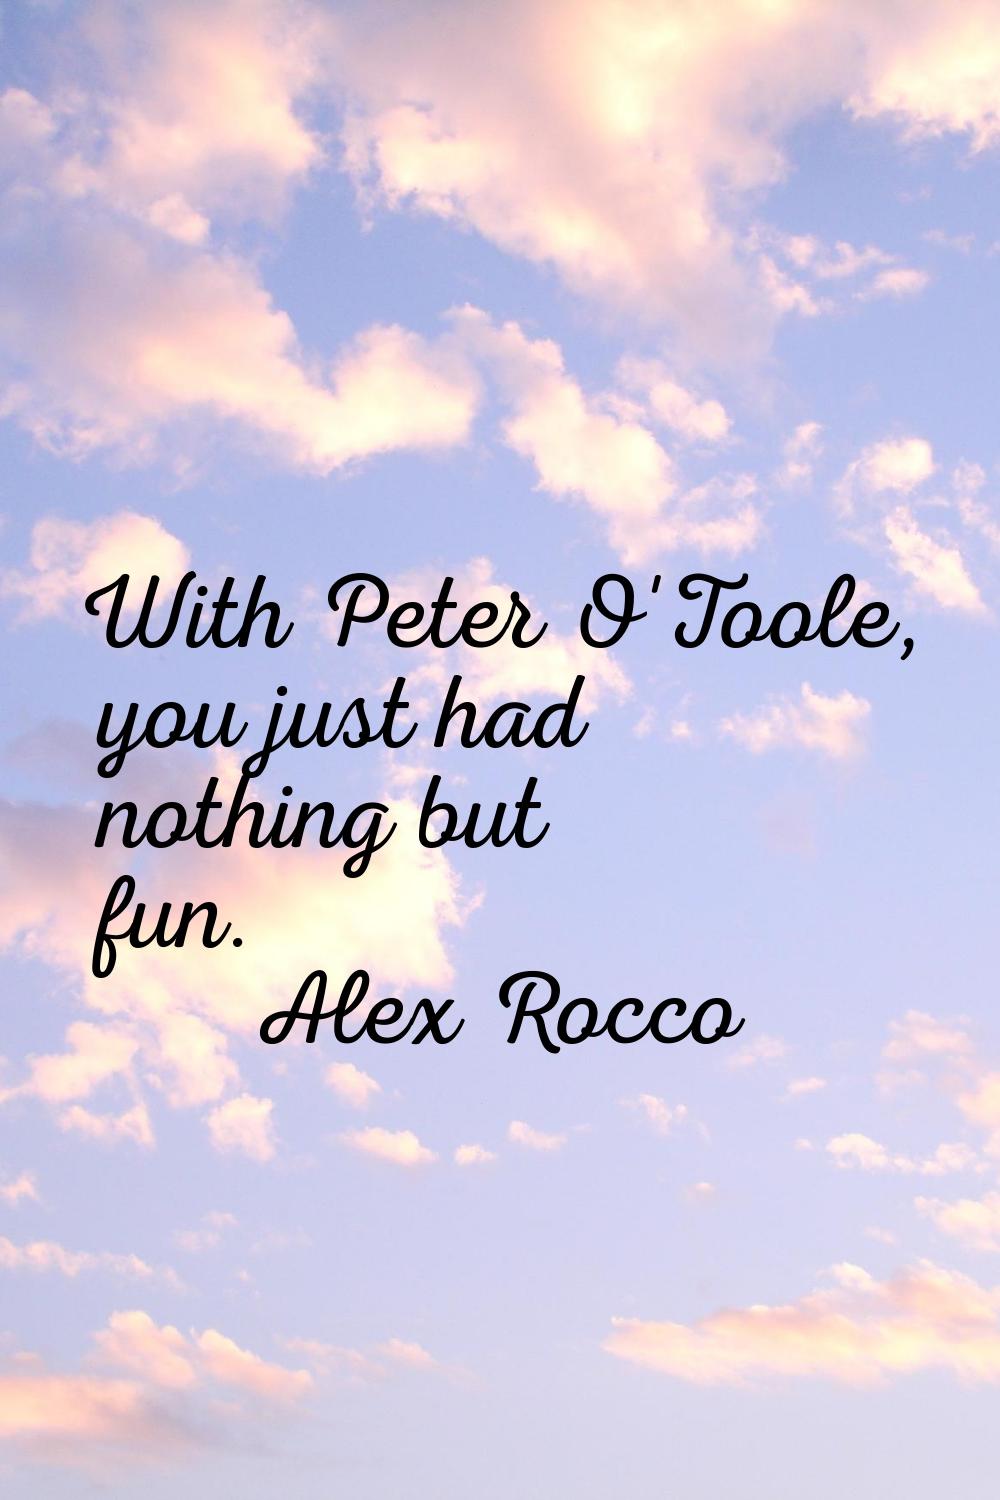 With Peter O'Toole, you just had nothing but fun.